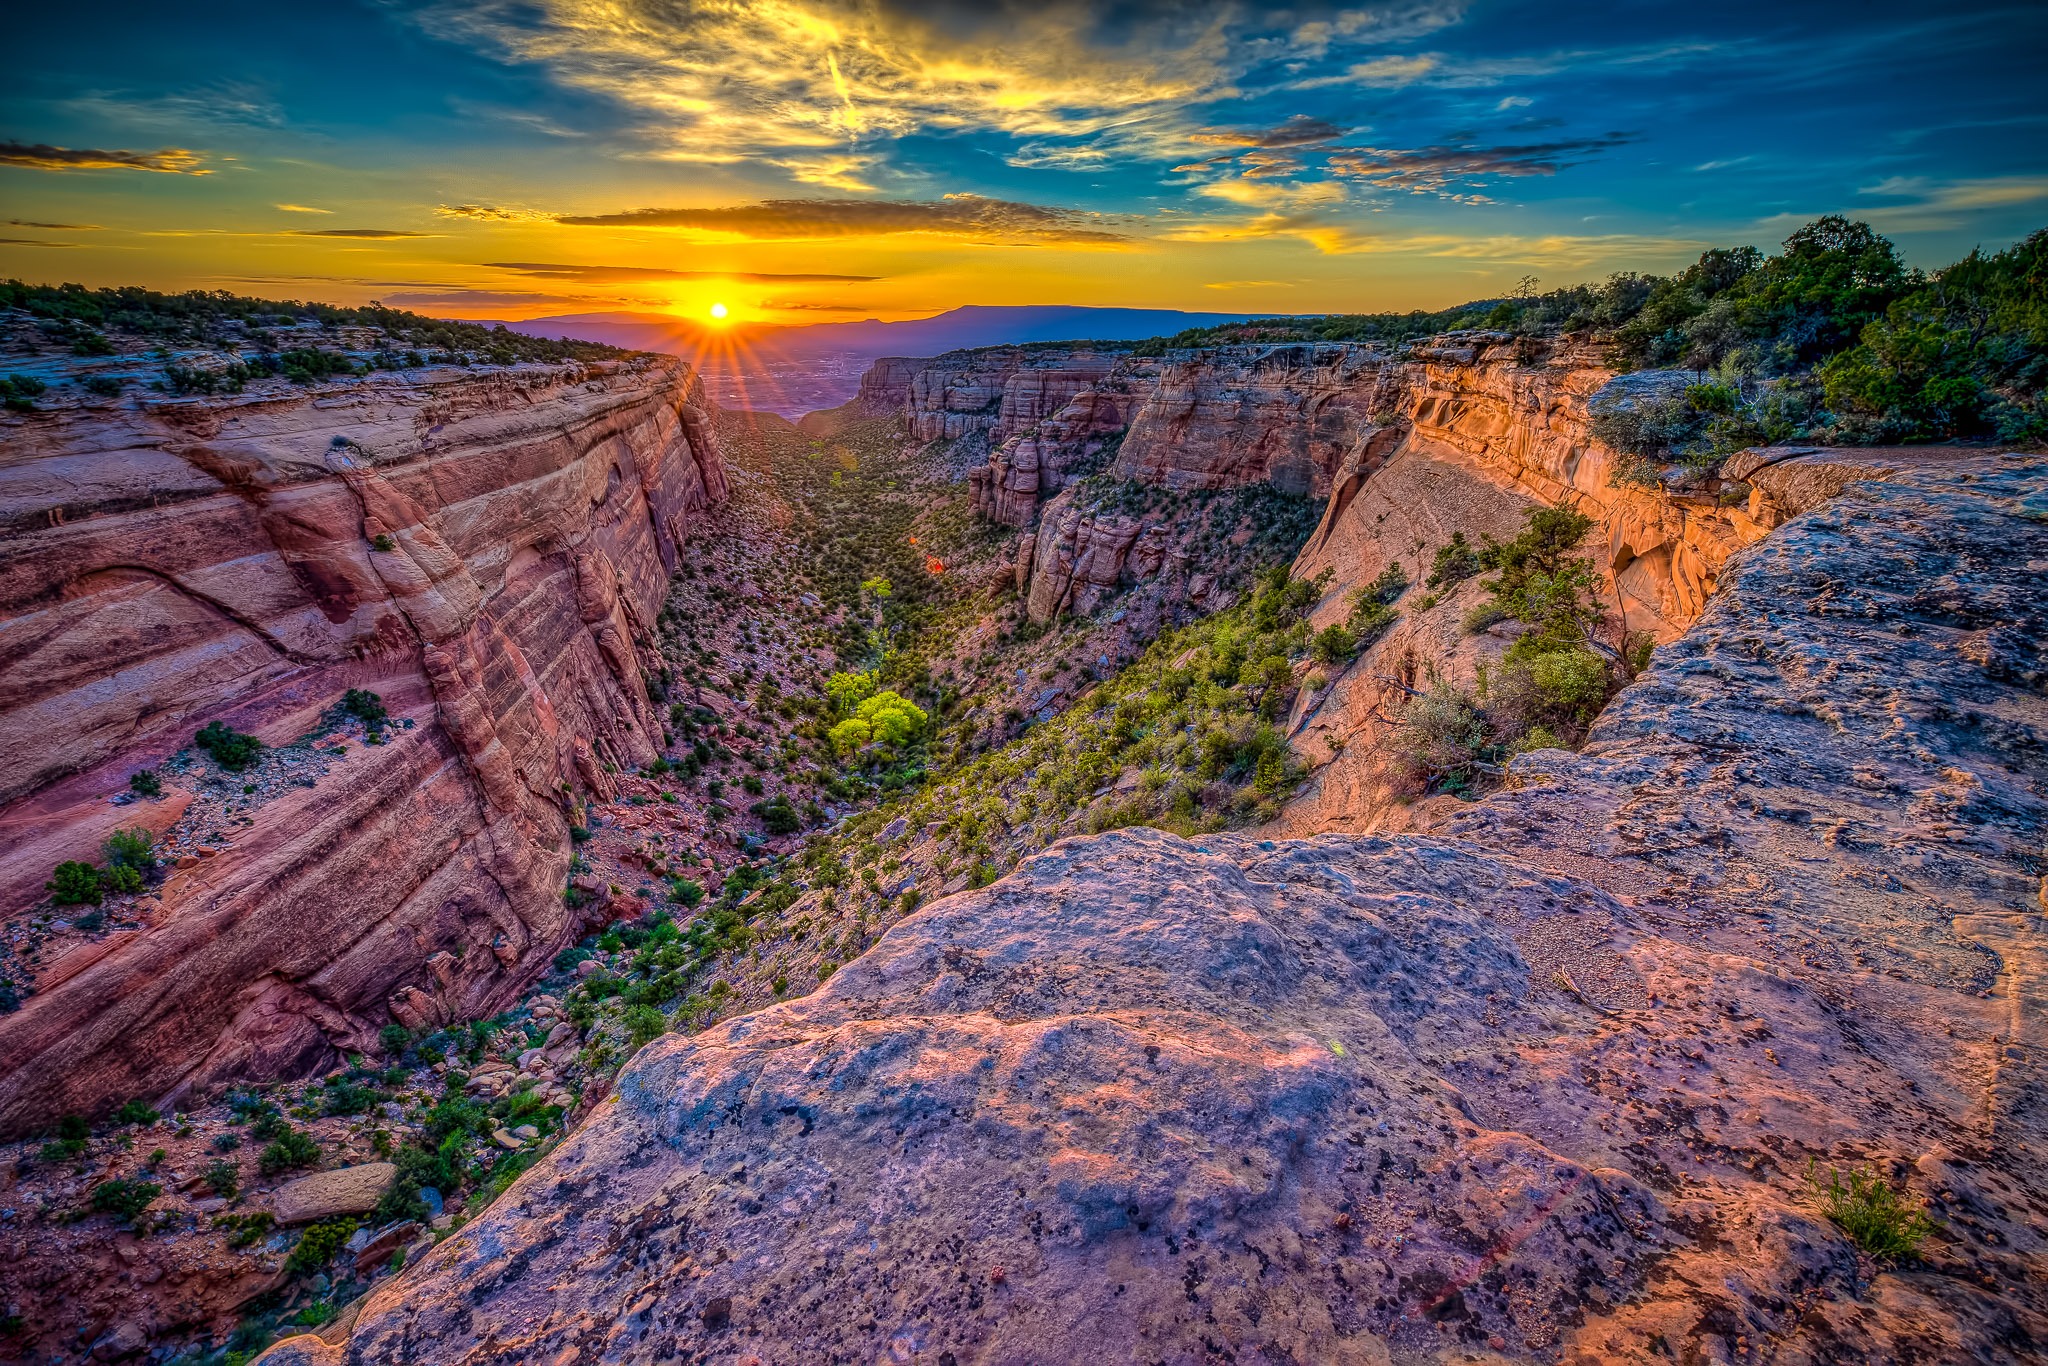 Sunrise illuminates Red Canyon in Colorado National Monument, near Grand Junction, on the Colorado Plateau.